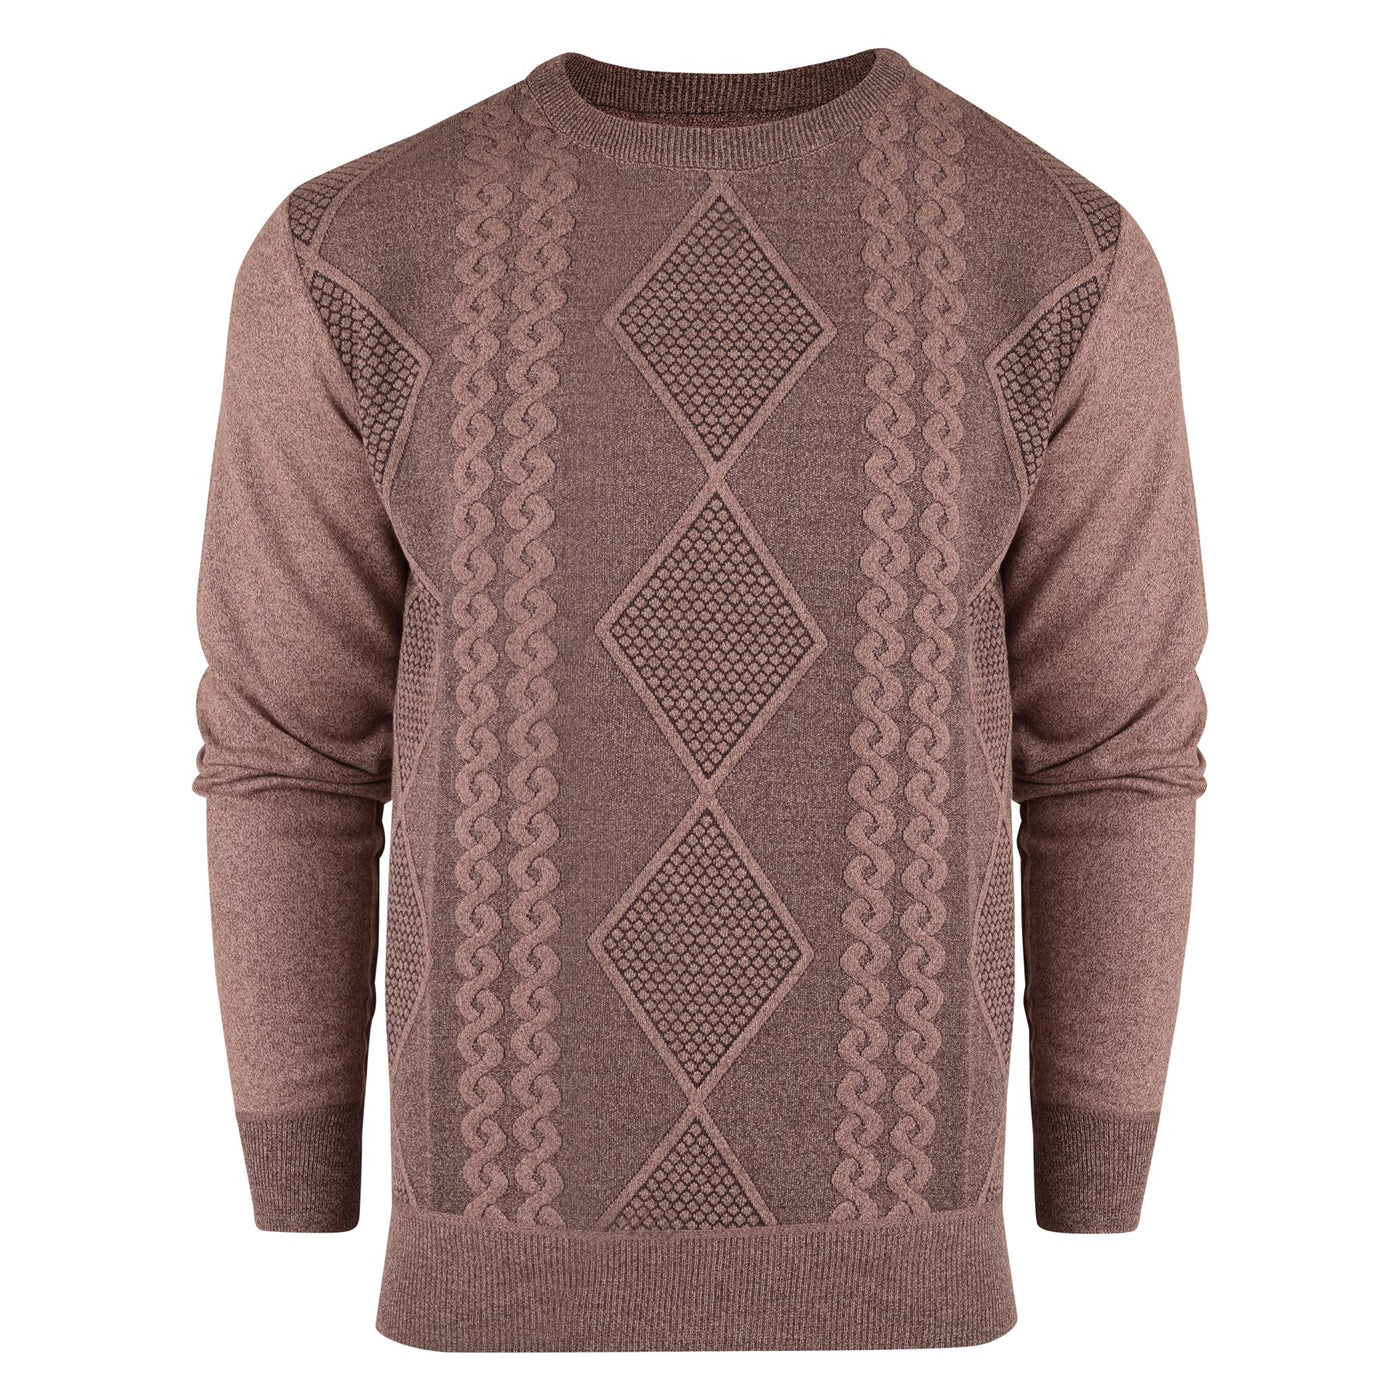 Mens Cable Knit Jumper Crew Neck Long Sleeve Pullover Soft Warm Round Neck Winter Knitwear Black Blue Brown  M L XL XXL